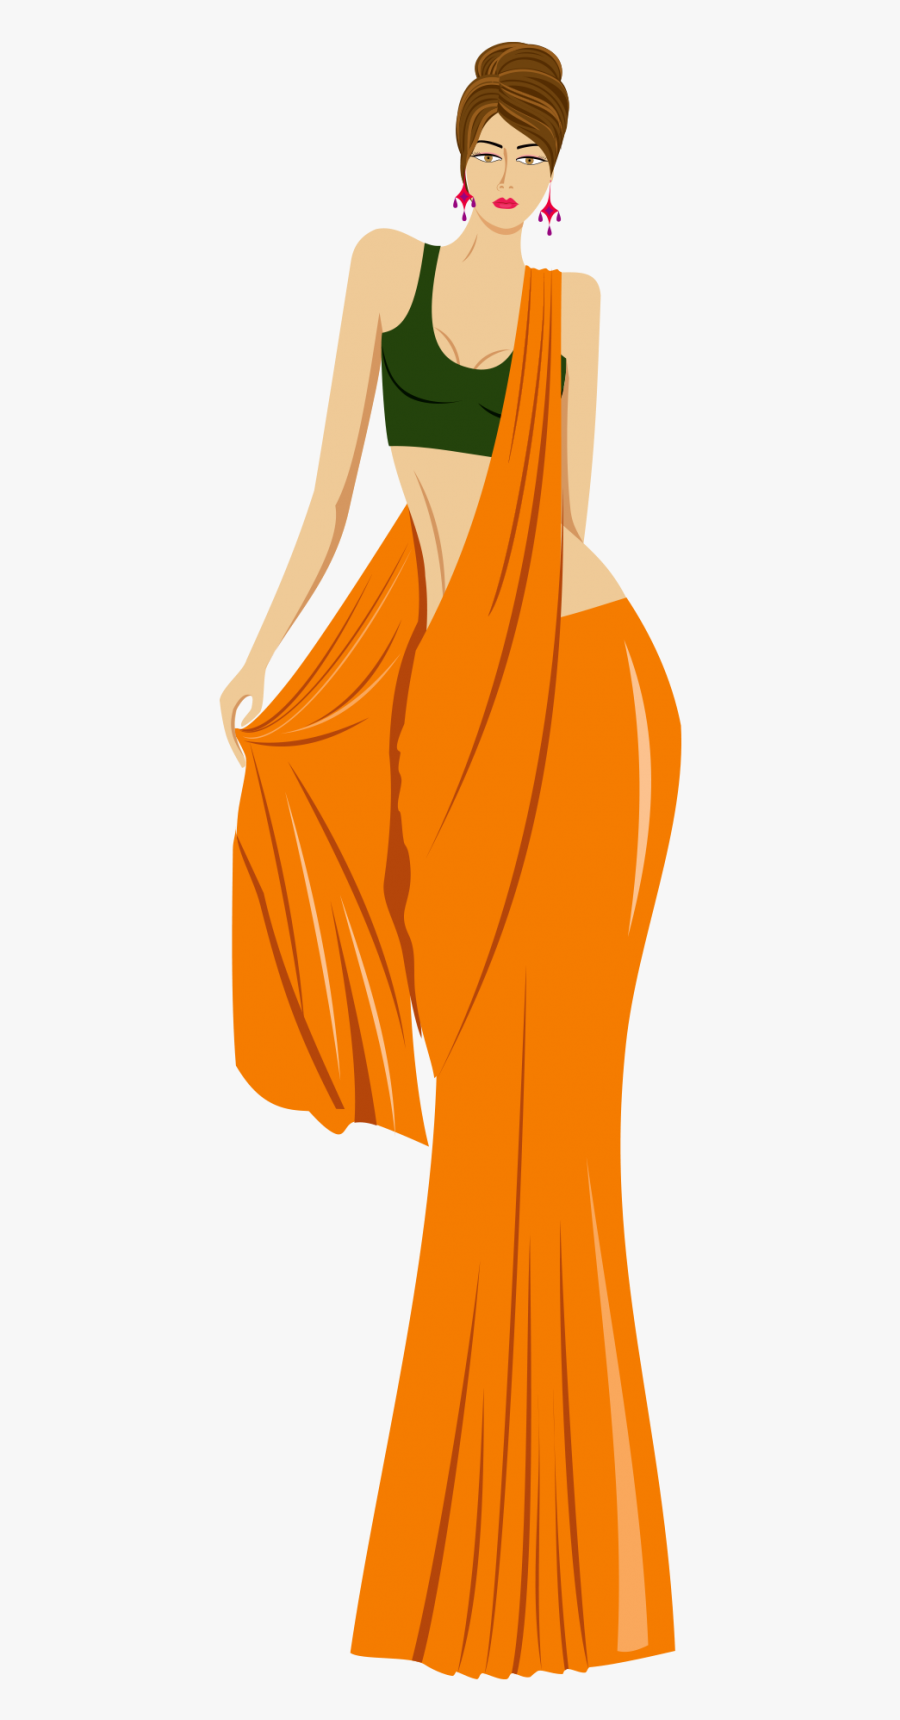 Woman In Saree Png Image Free Download Searchpng - Cartoon Images Of Saree, Transparent Clipart